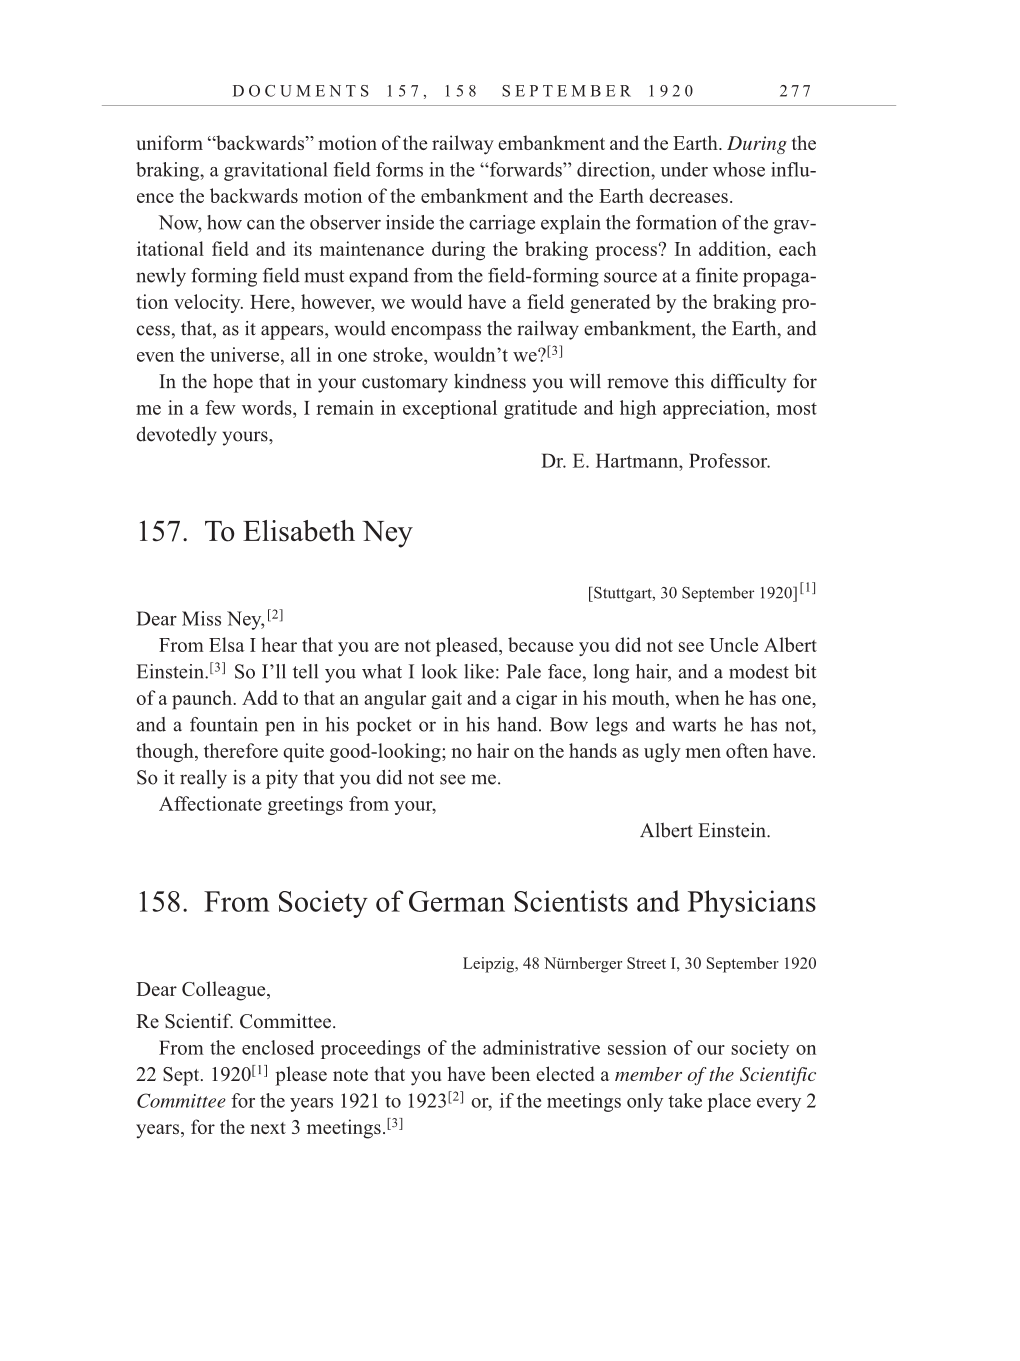 Volume 10: The Berlin Years: Correspondence, May-December 1920, and Supplementary Correspondence, 1909-1920 (English translation supplement) page 277